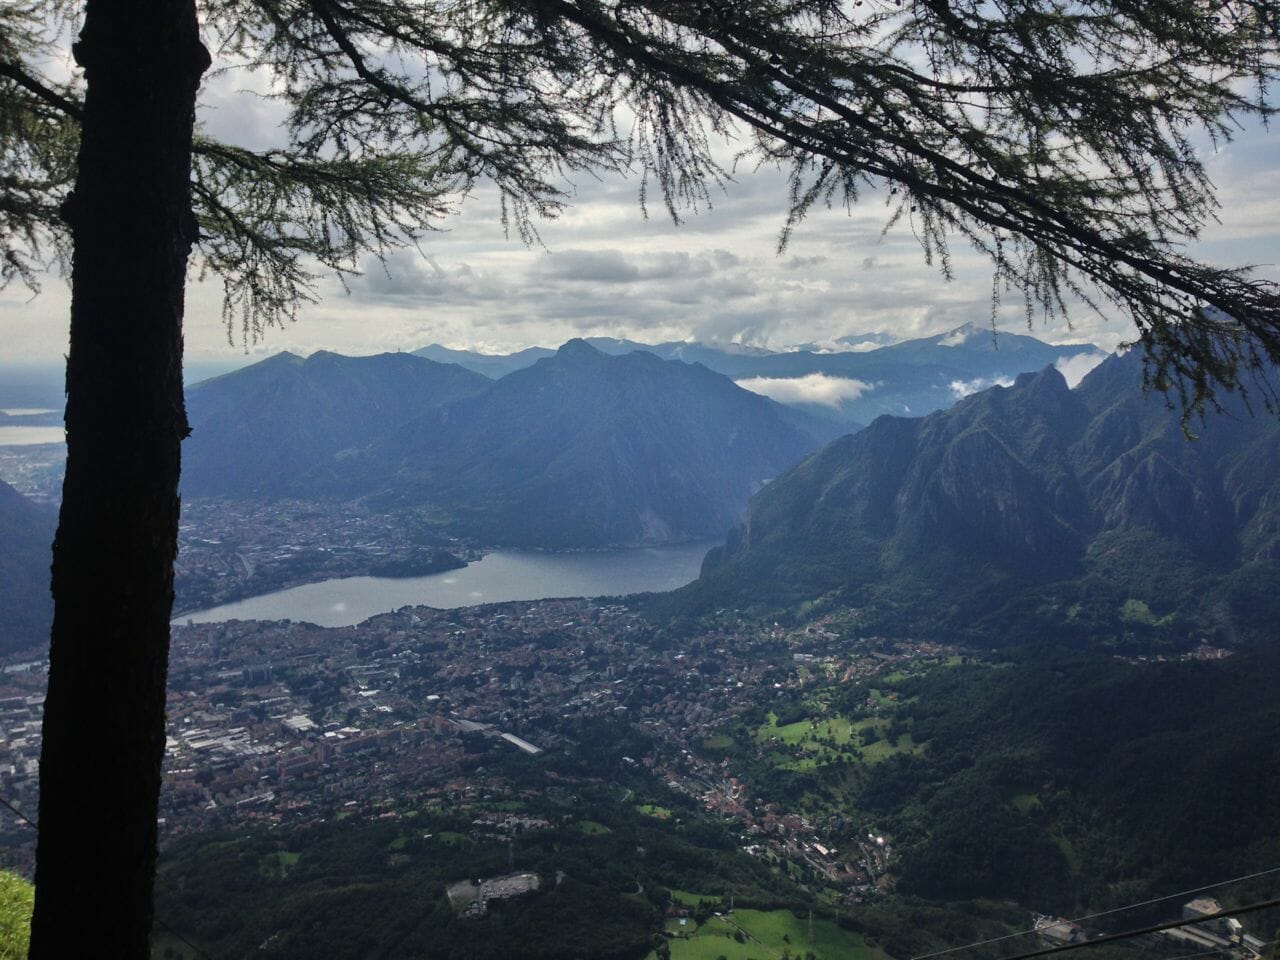 The view of Lecco from Mount Resegone on the Piani D'Erna plateau.